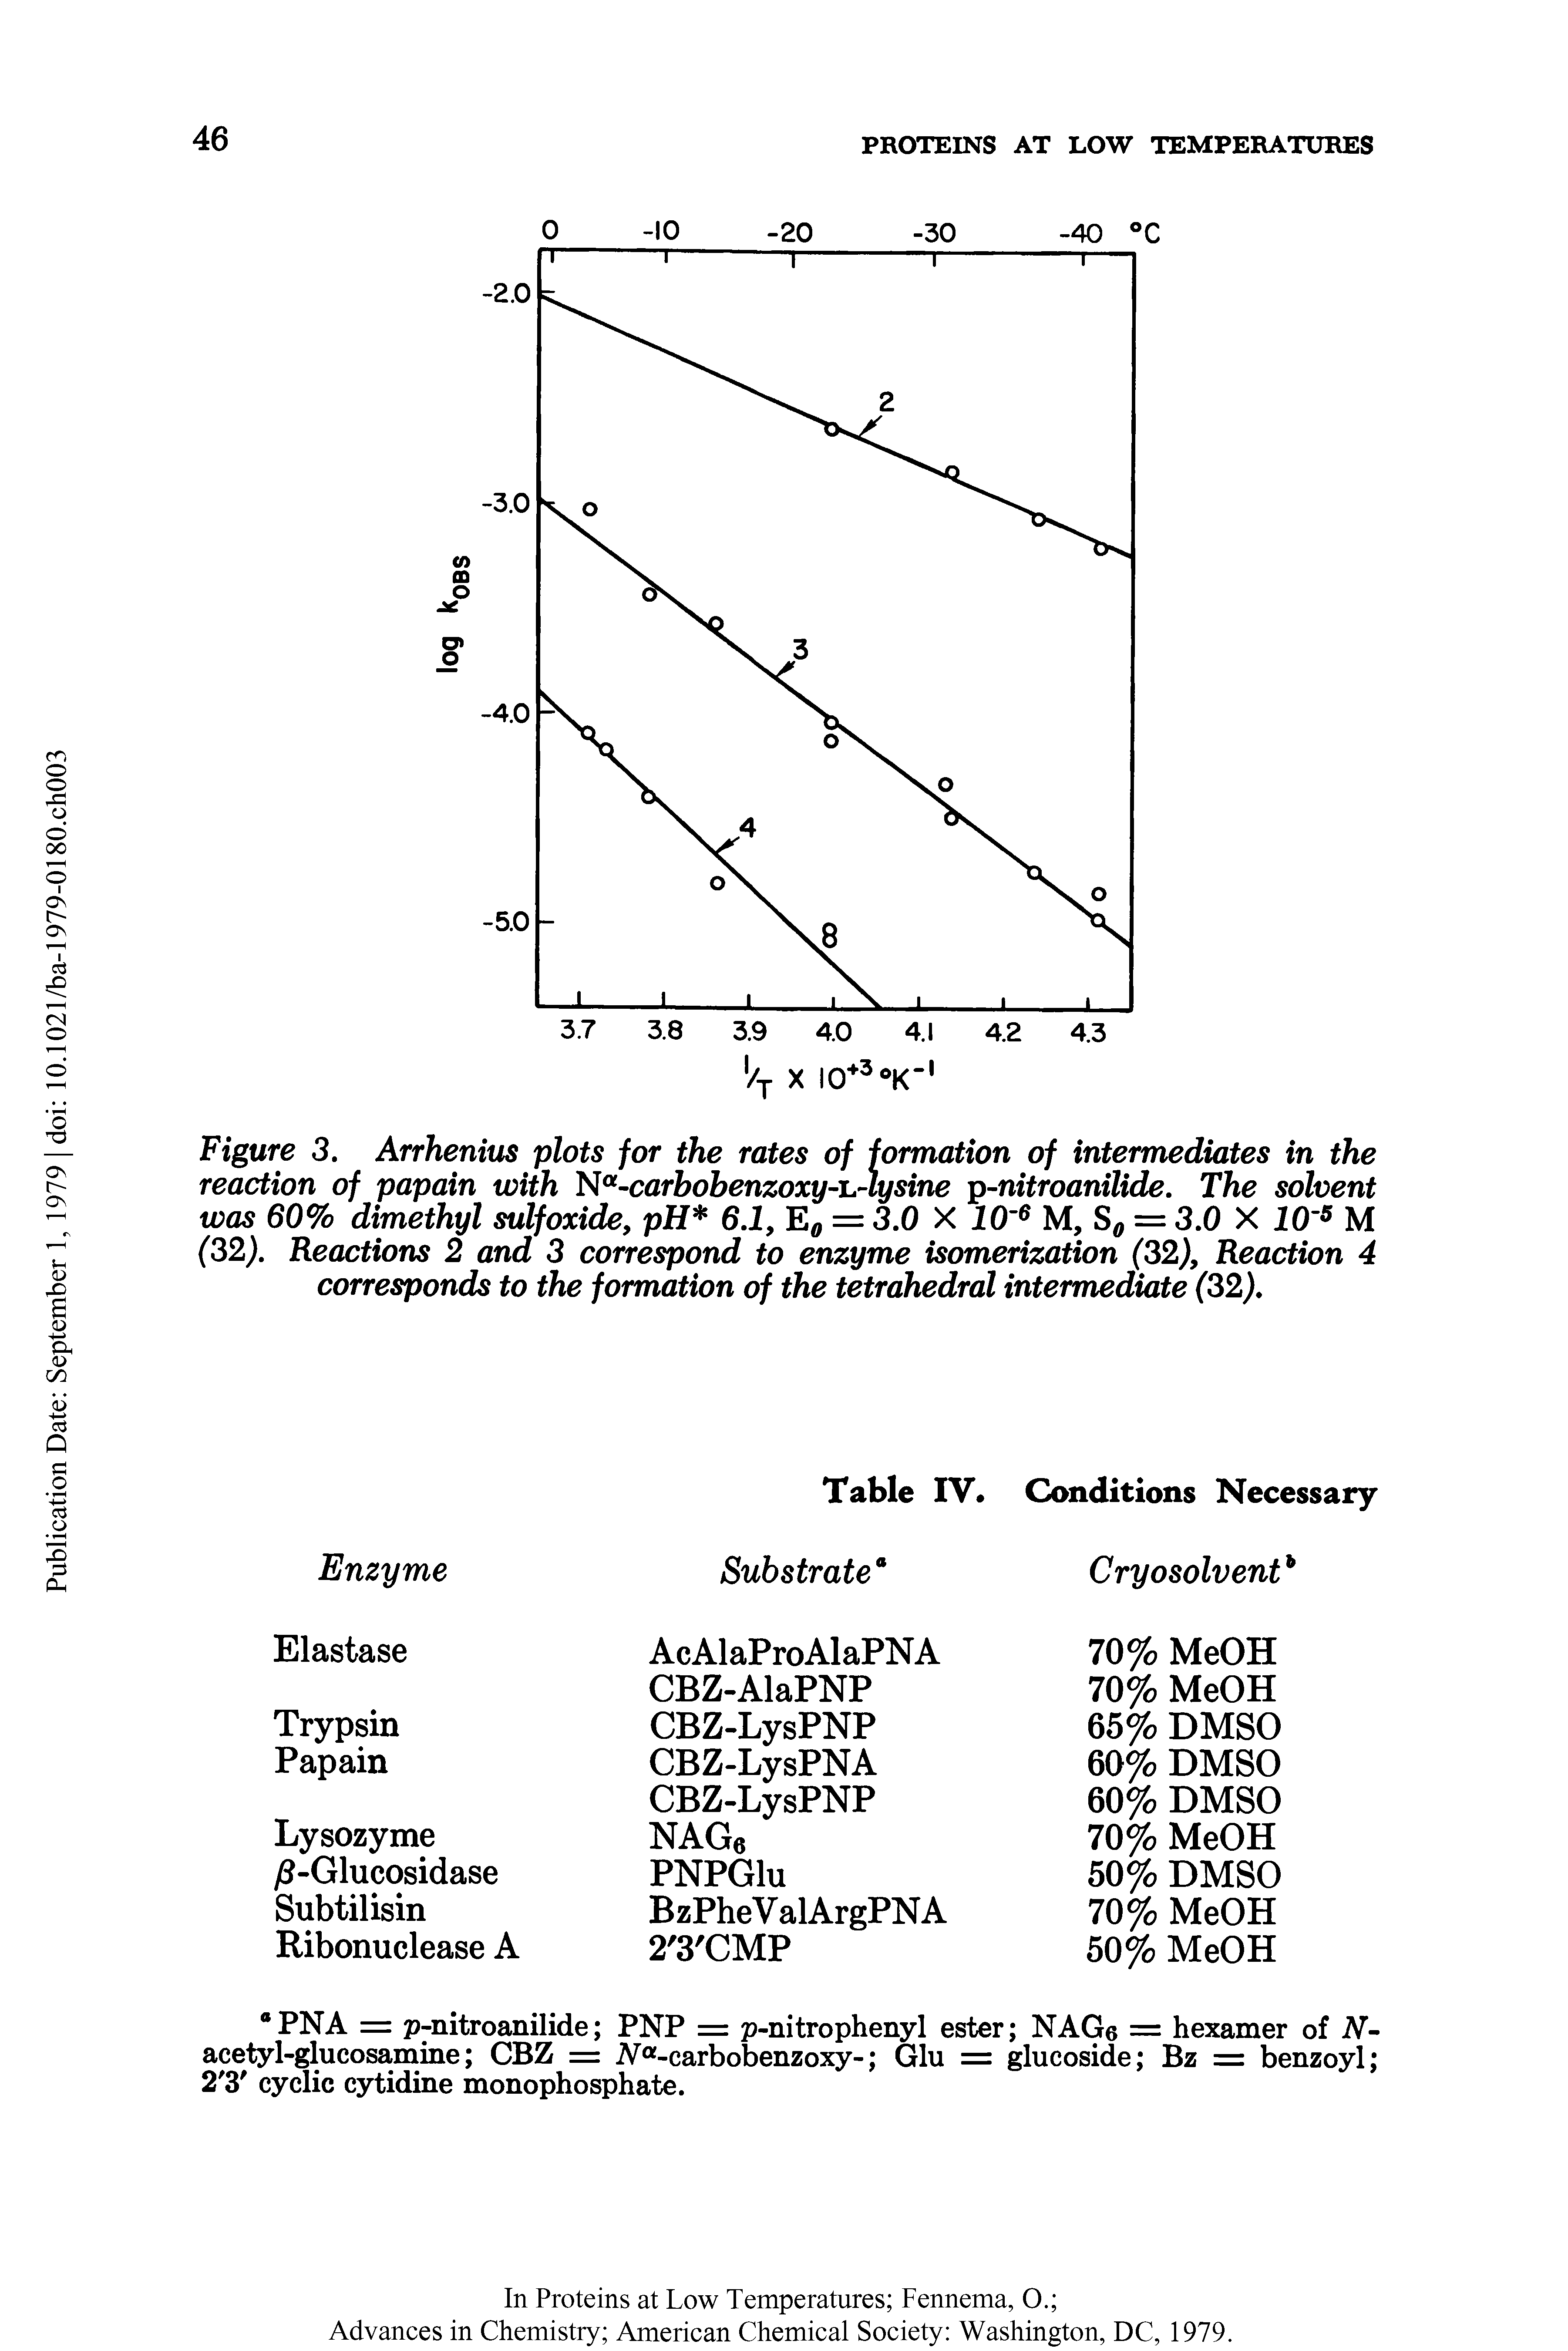 Figure 3. Arrhenius plots for the rates of formation of intermediates in the reaction of papain with Na-carbobenzoxy-iL-lysine p-nitroanilide. The solvent was 60% dimethyl sulfoxide, pH 6.1, E0 = 3.0 X 10 6 M, = 3.0 X 10 5 M (32). Reactions 2 and 3 correspond to enzyme isomerization (32), Reaction 4 corresponds to the formation of the tetrahedral intermediate (32).